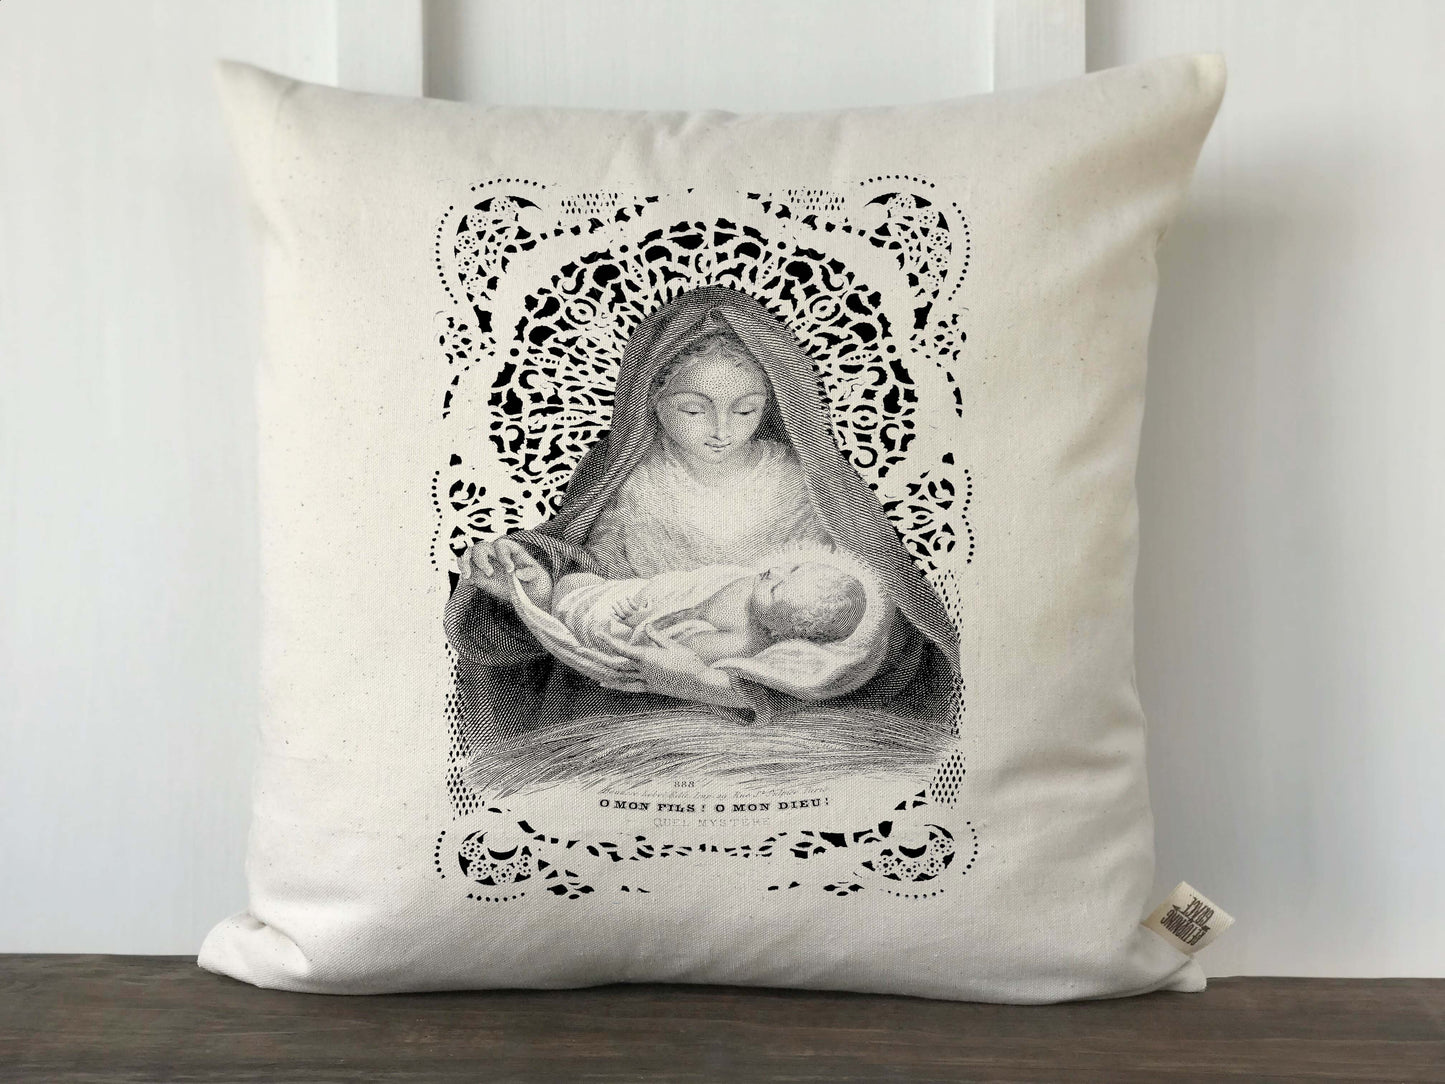 Mary and Jesus Vintage French Prayer Card Christmas Pillow Cover - Returning Grace Designs